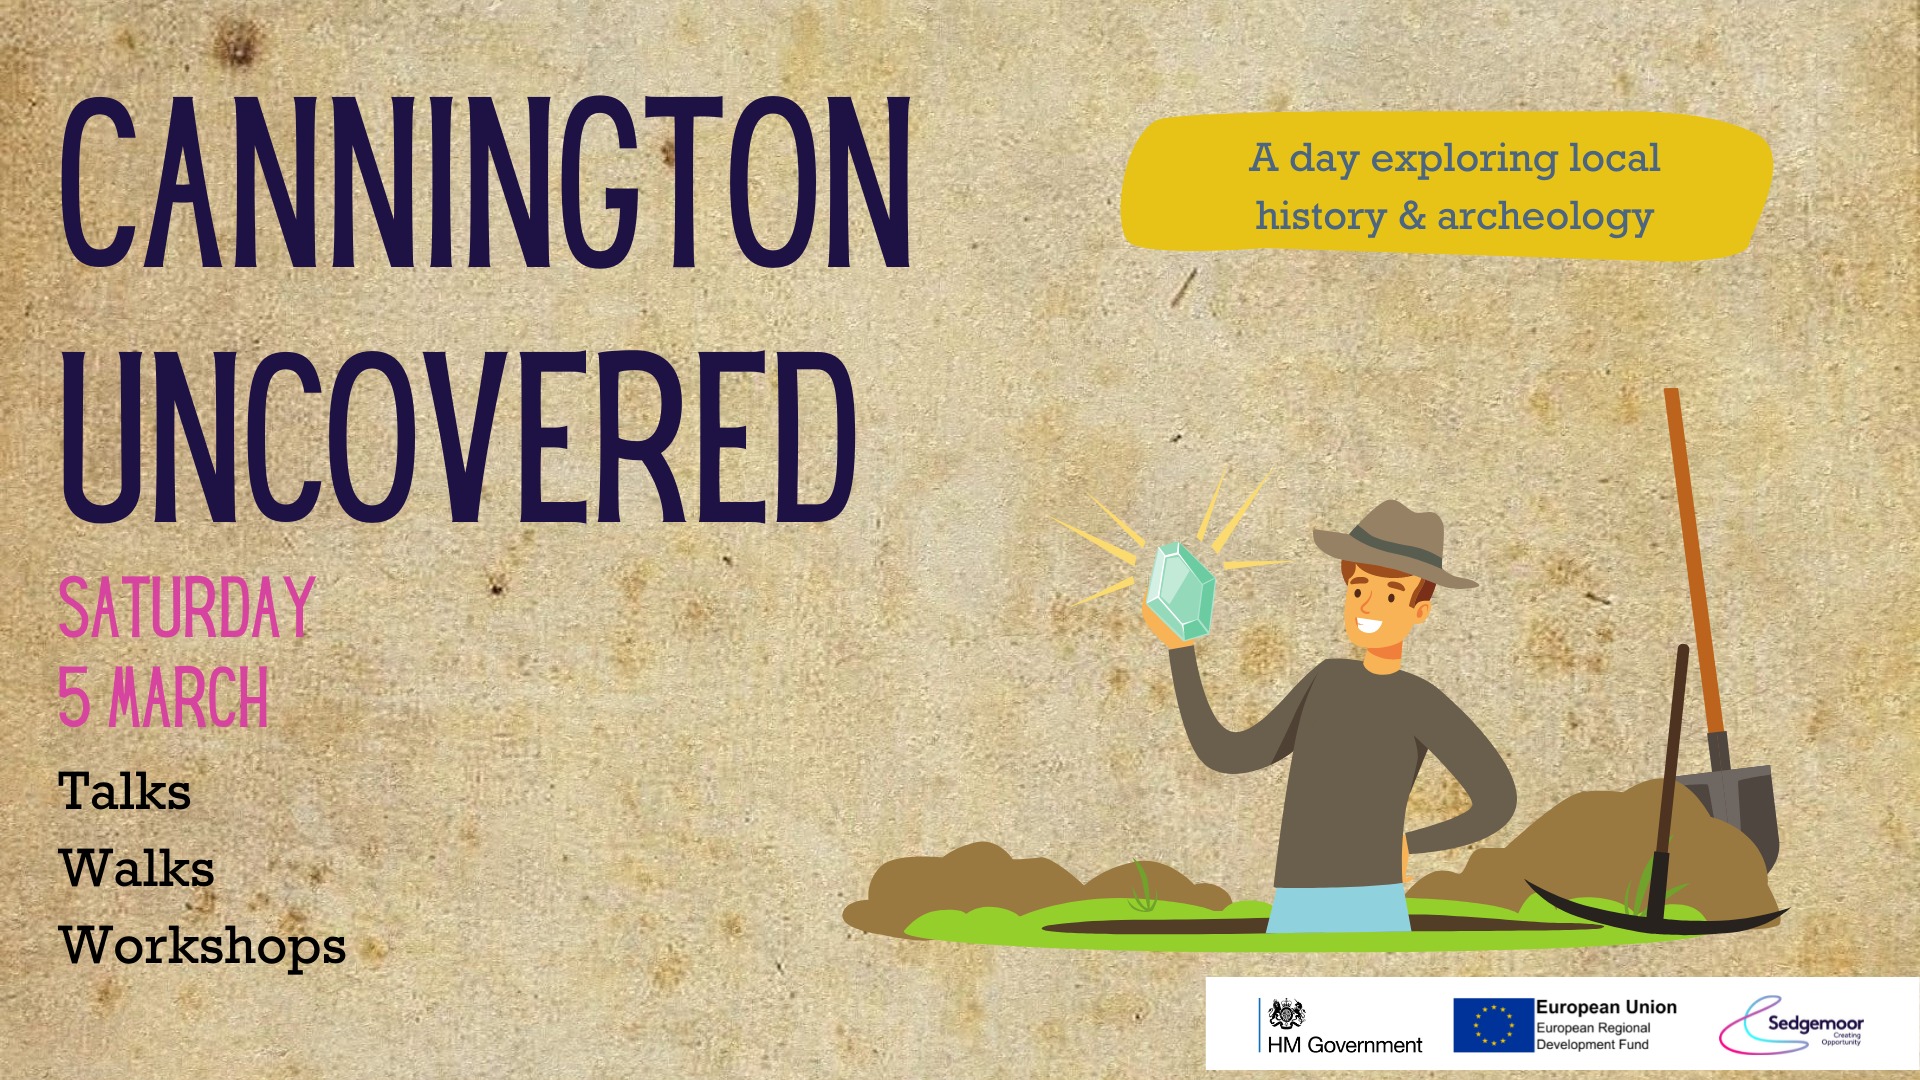 Cannington Uncovered